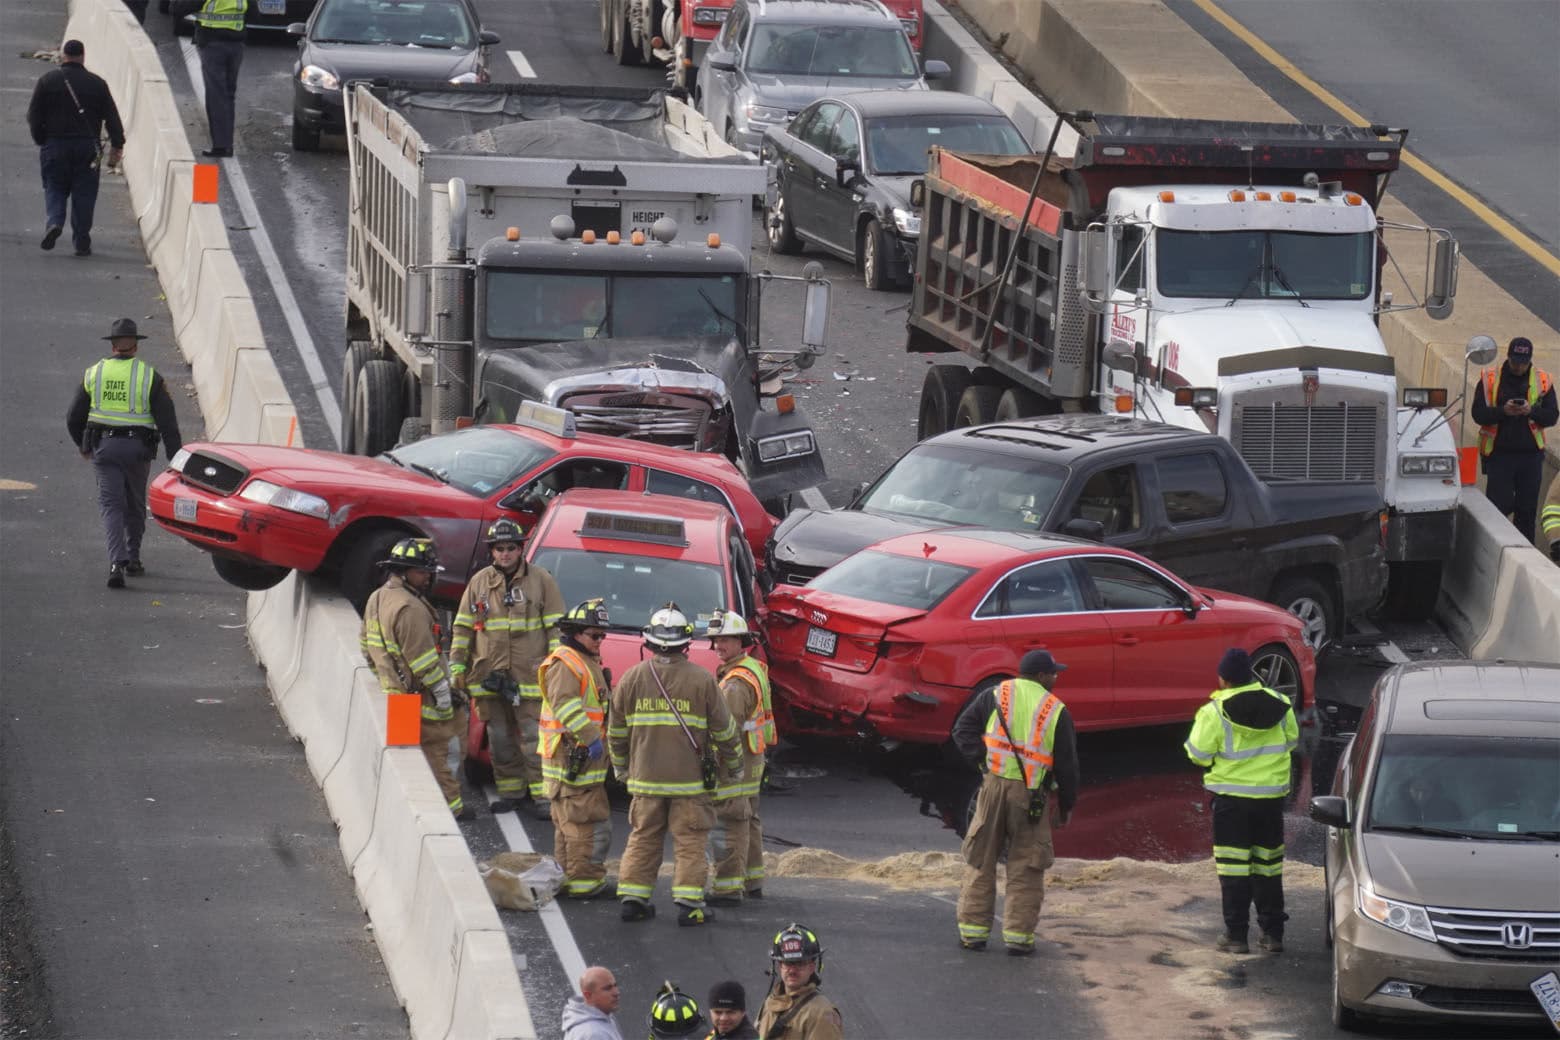 The crash involved a total of 10 vehicles, authorities said, including two taxis and a dump truck. (Courtesy Thomas Philibin/Live Wire Media Relations)